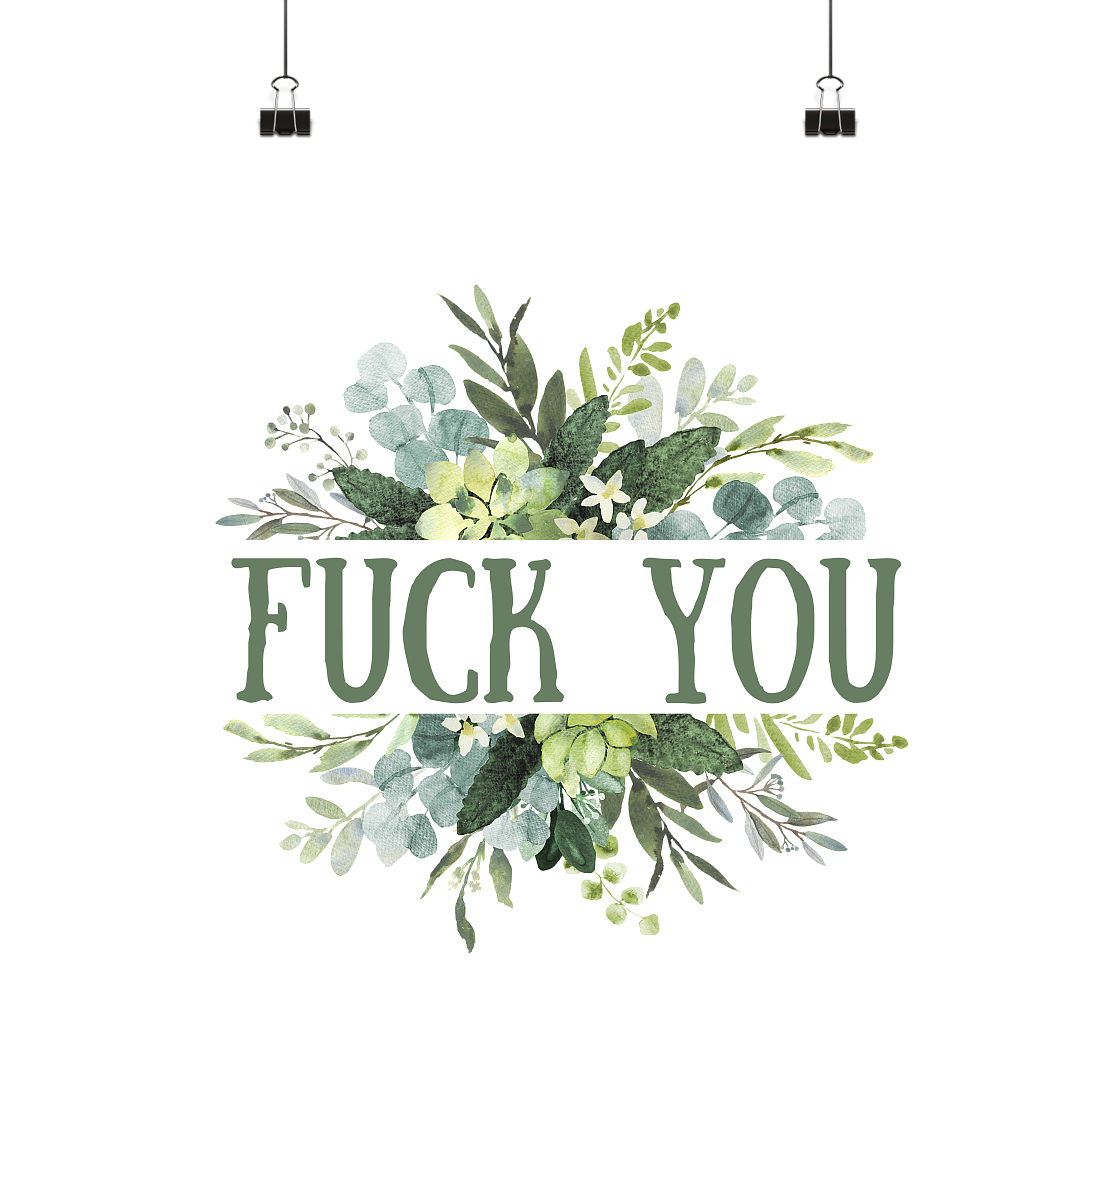 FUCK YOU - Poster Din A4 (hoch)